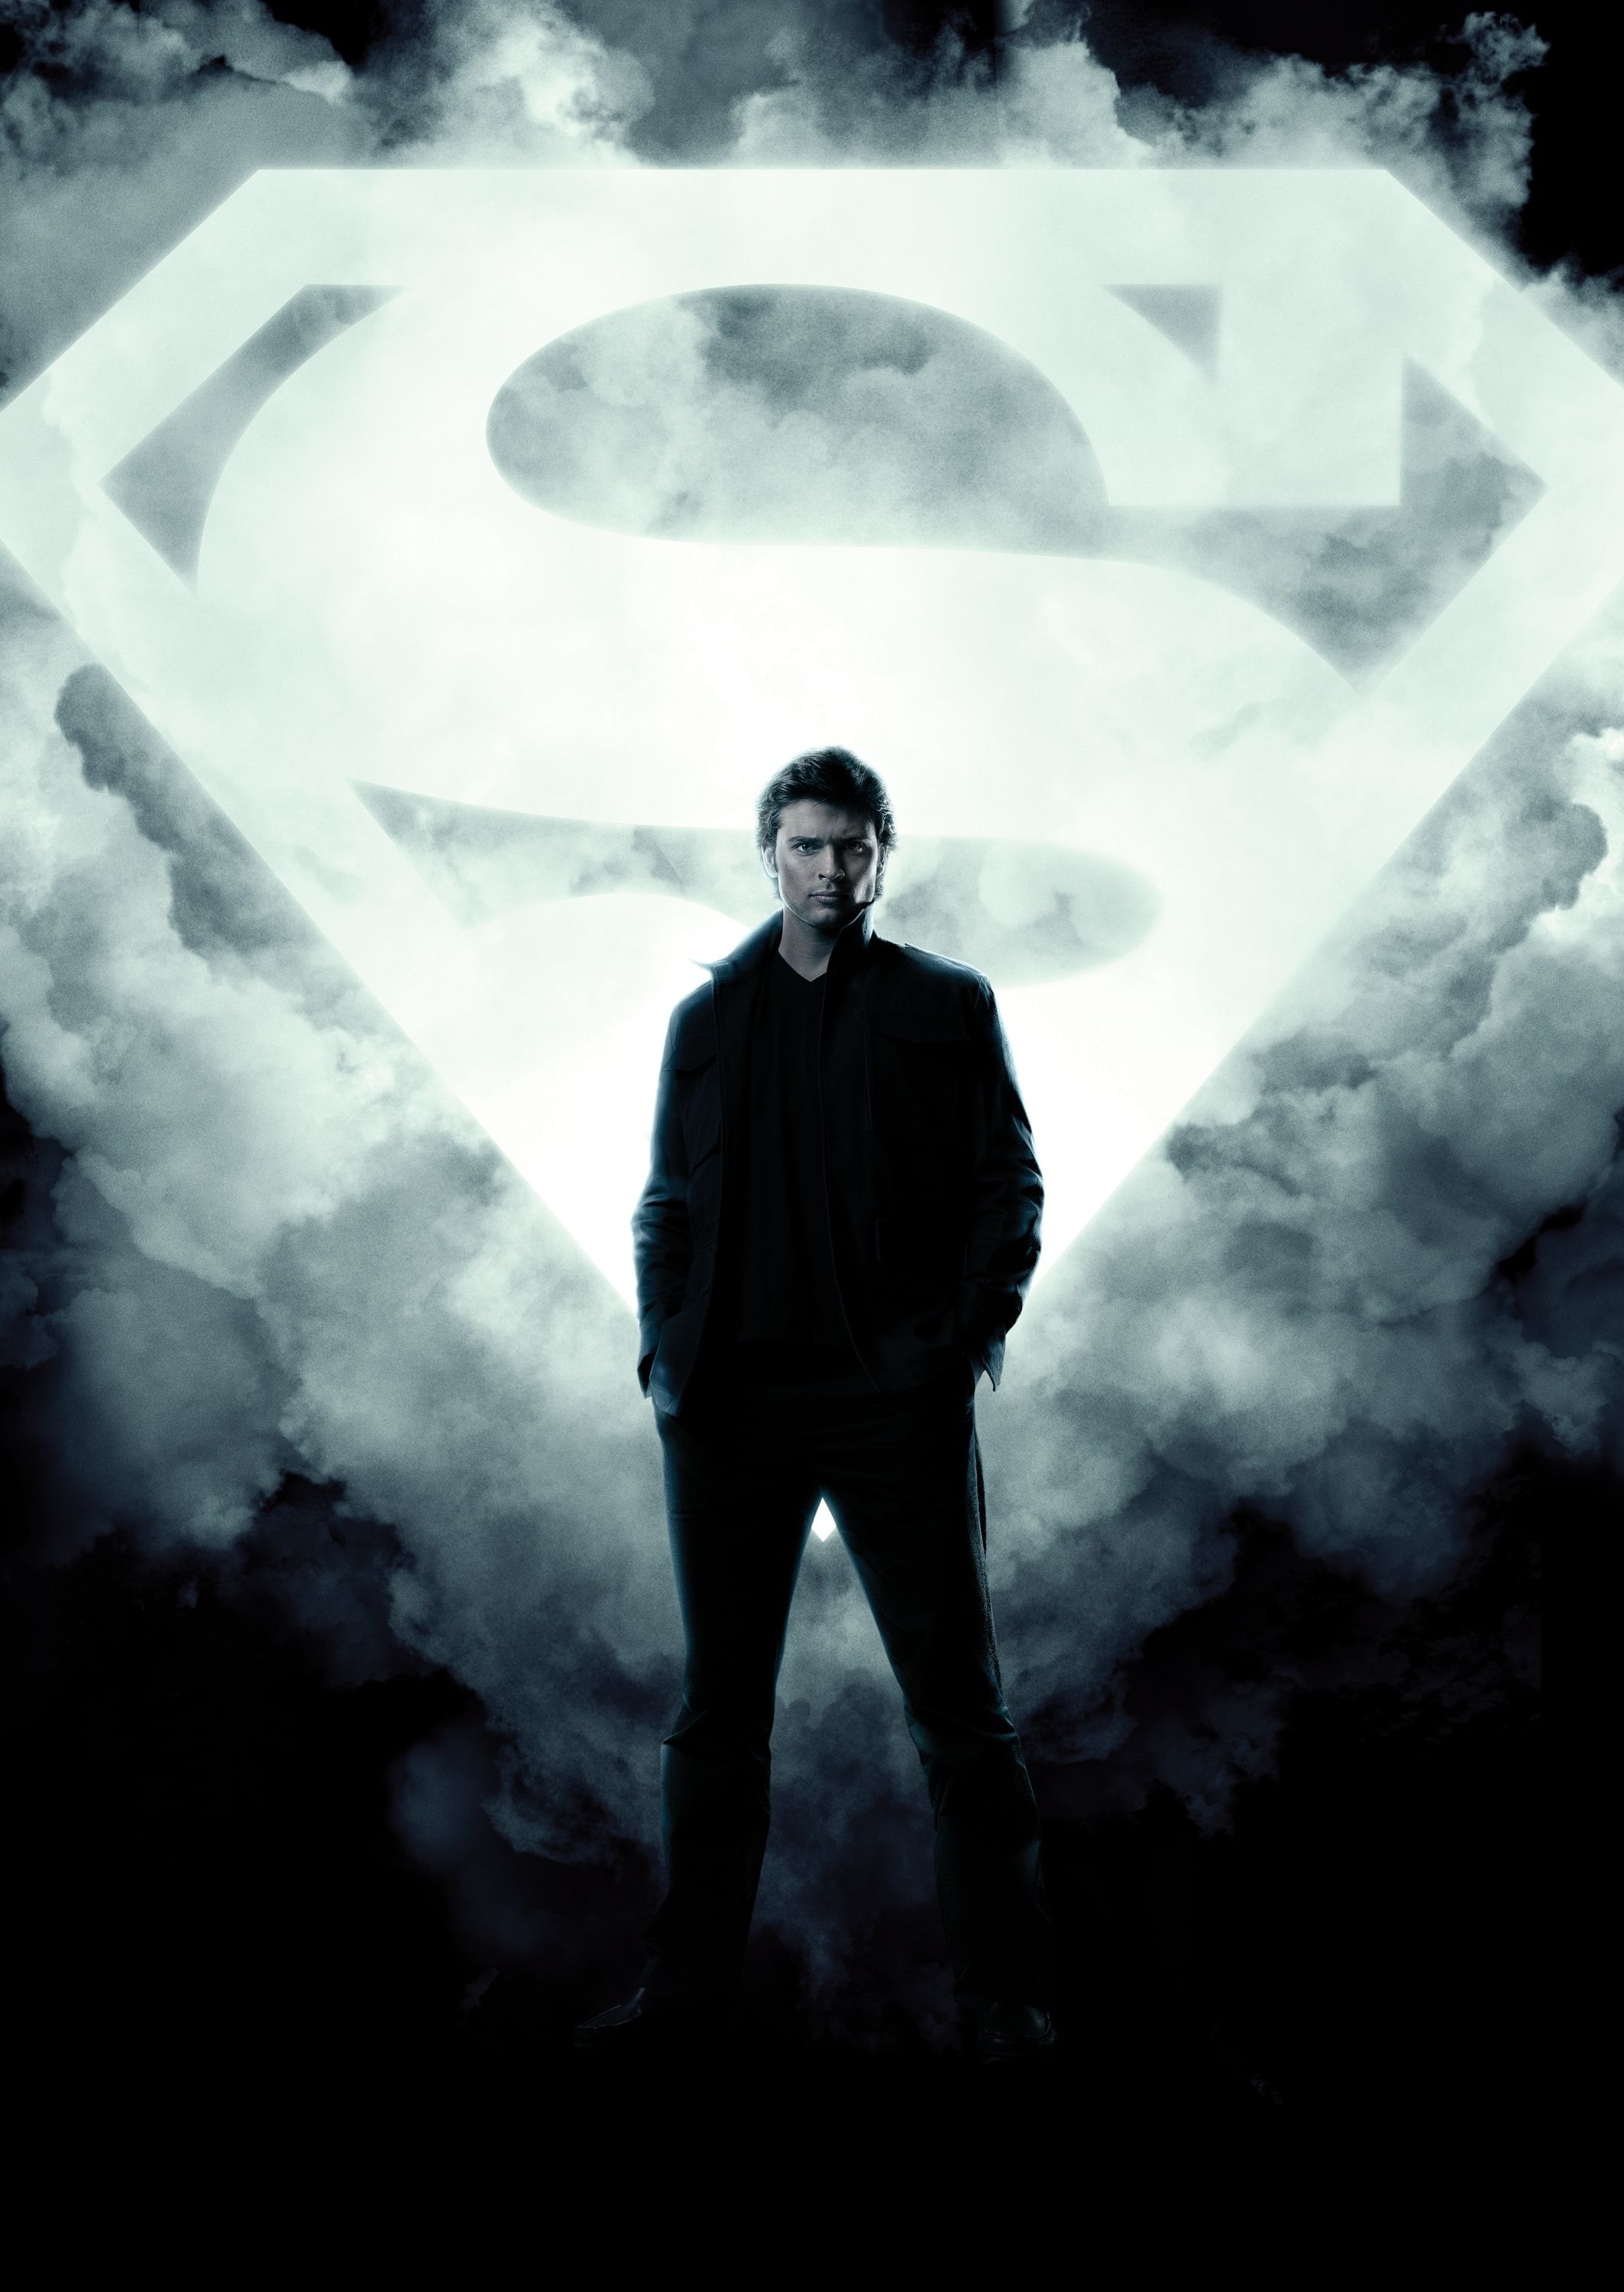 Smallville (TV Series): Tom Welling, An American actor, director, producer, Teen Choice Award nomination. 2130x3000 HD Background.